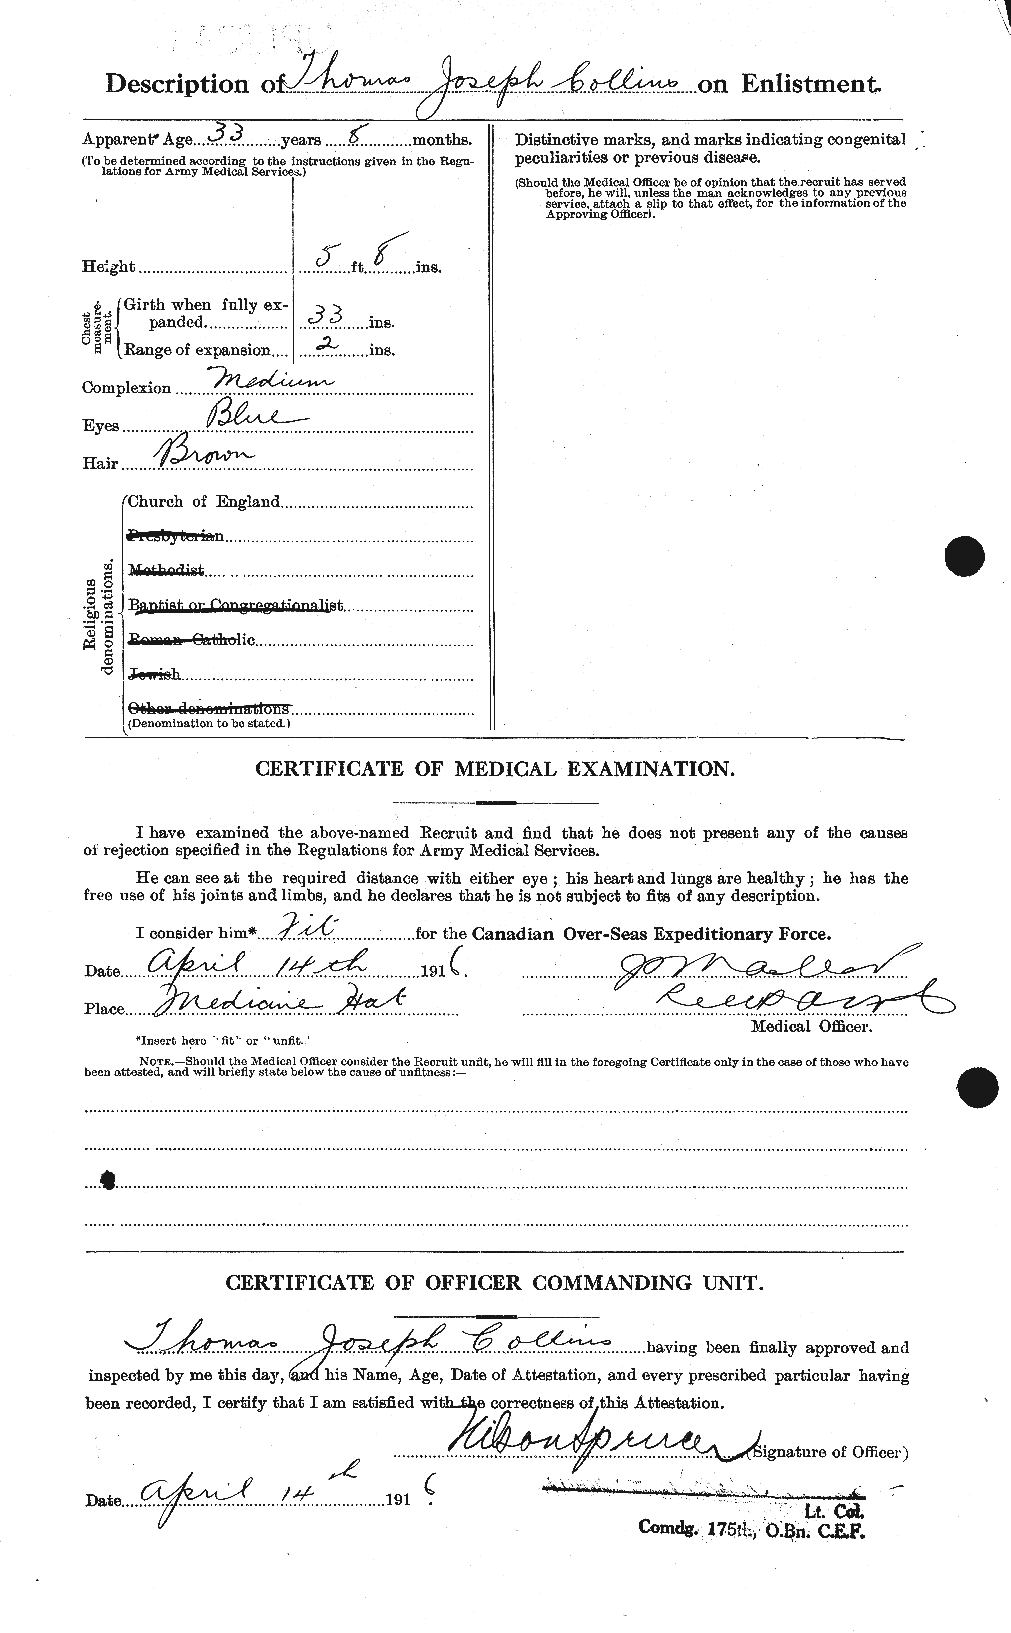 Personnel Records of the First World War - CEF 069123b